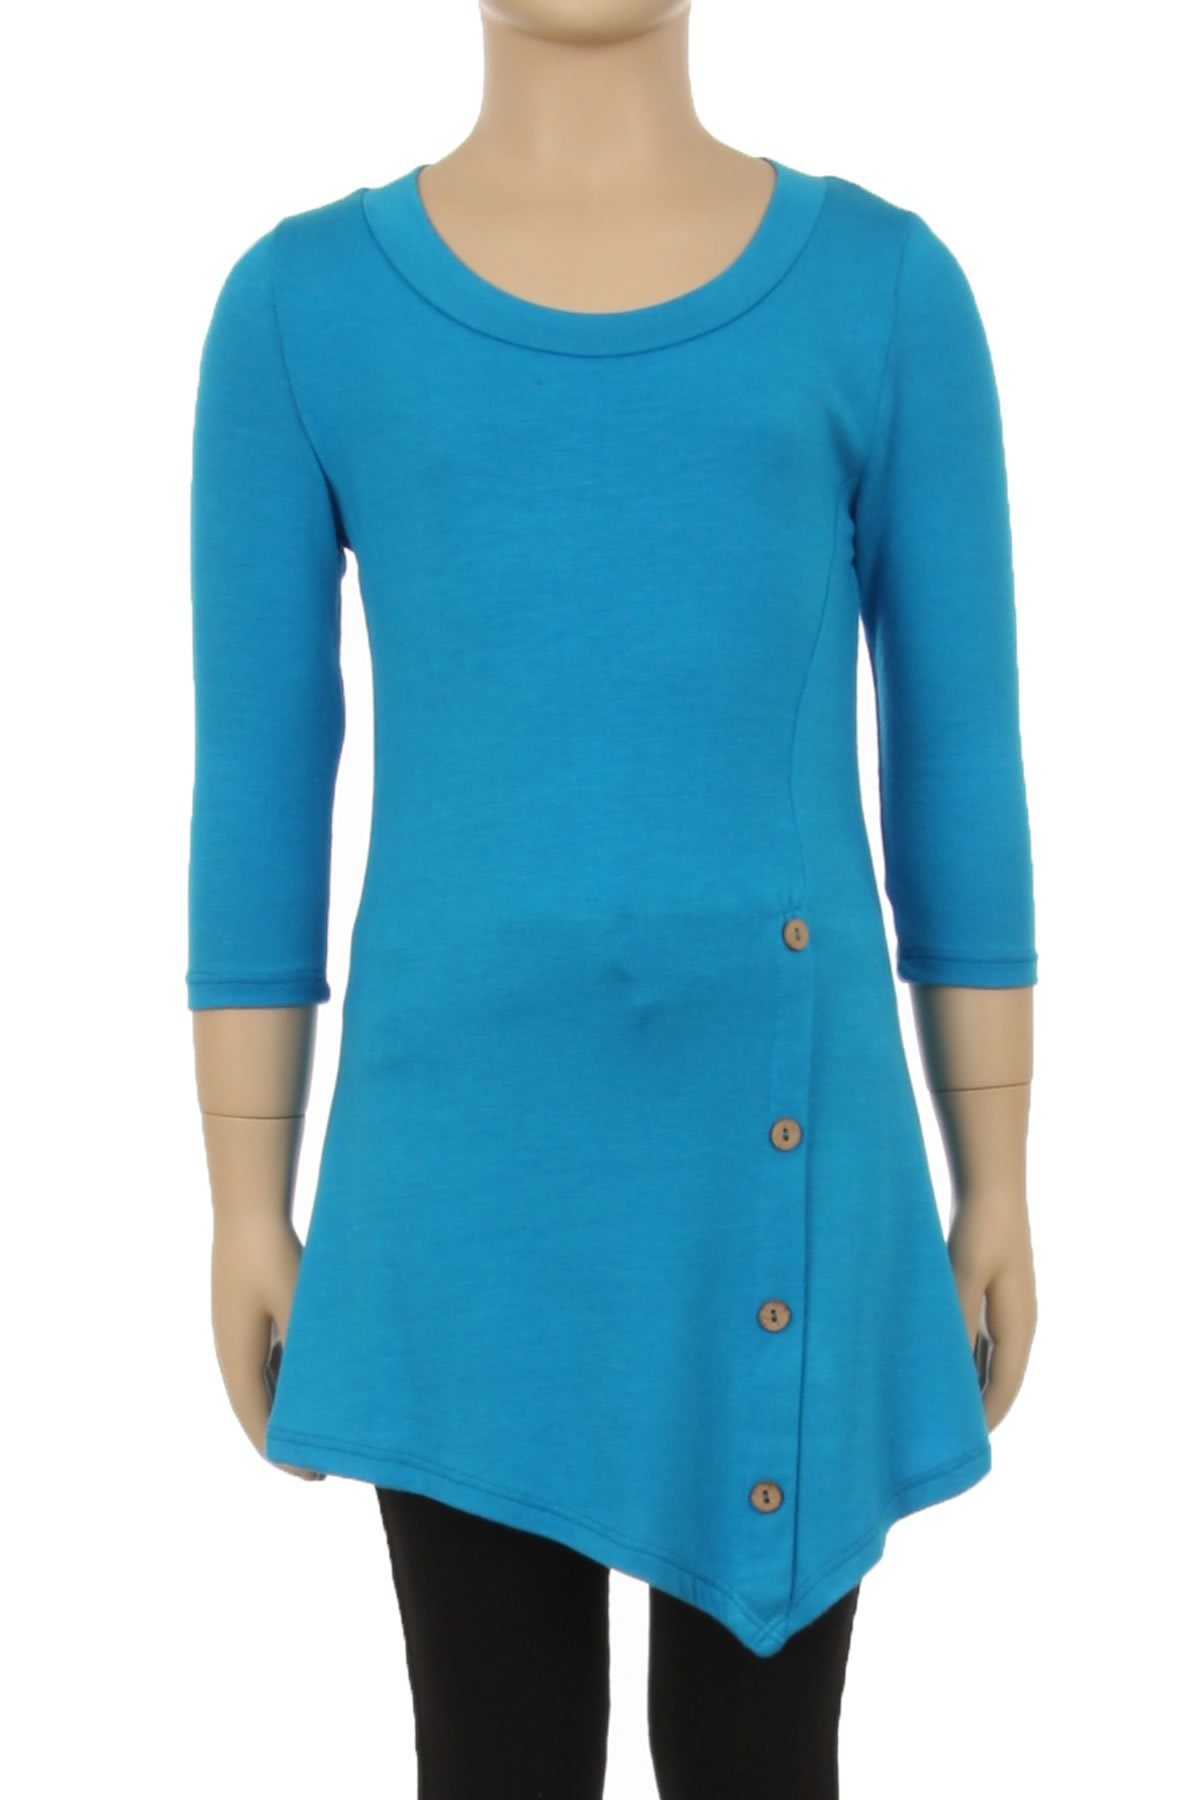 Girls Solid Teal Blue Dress Asymmetric 3/4 Sleeve Tunic Top Tops MomMe and More 